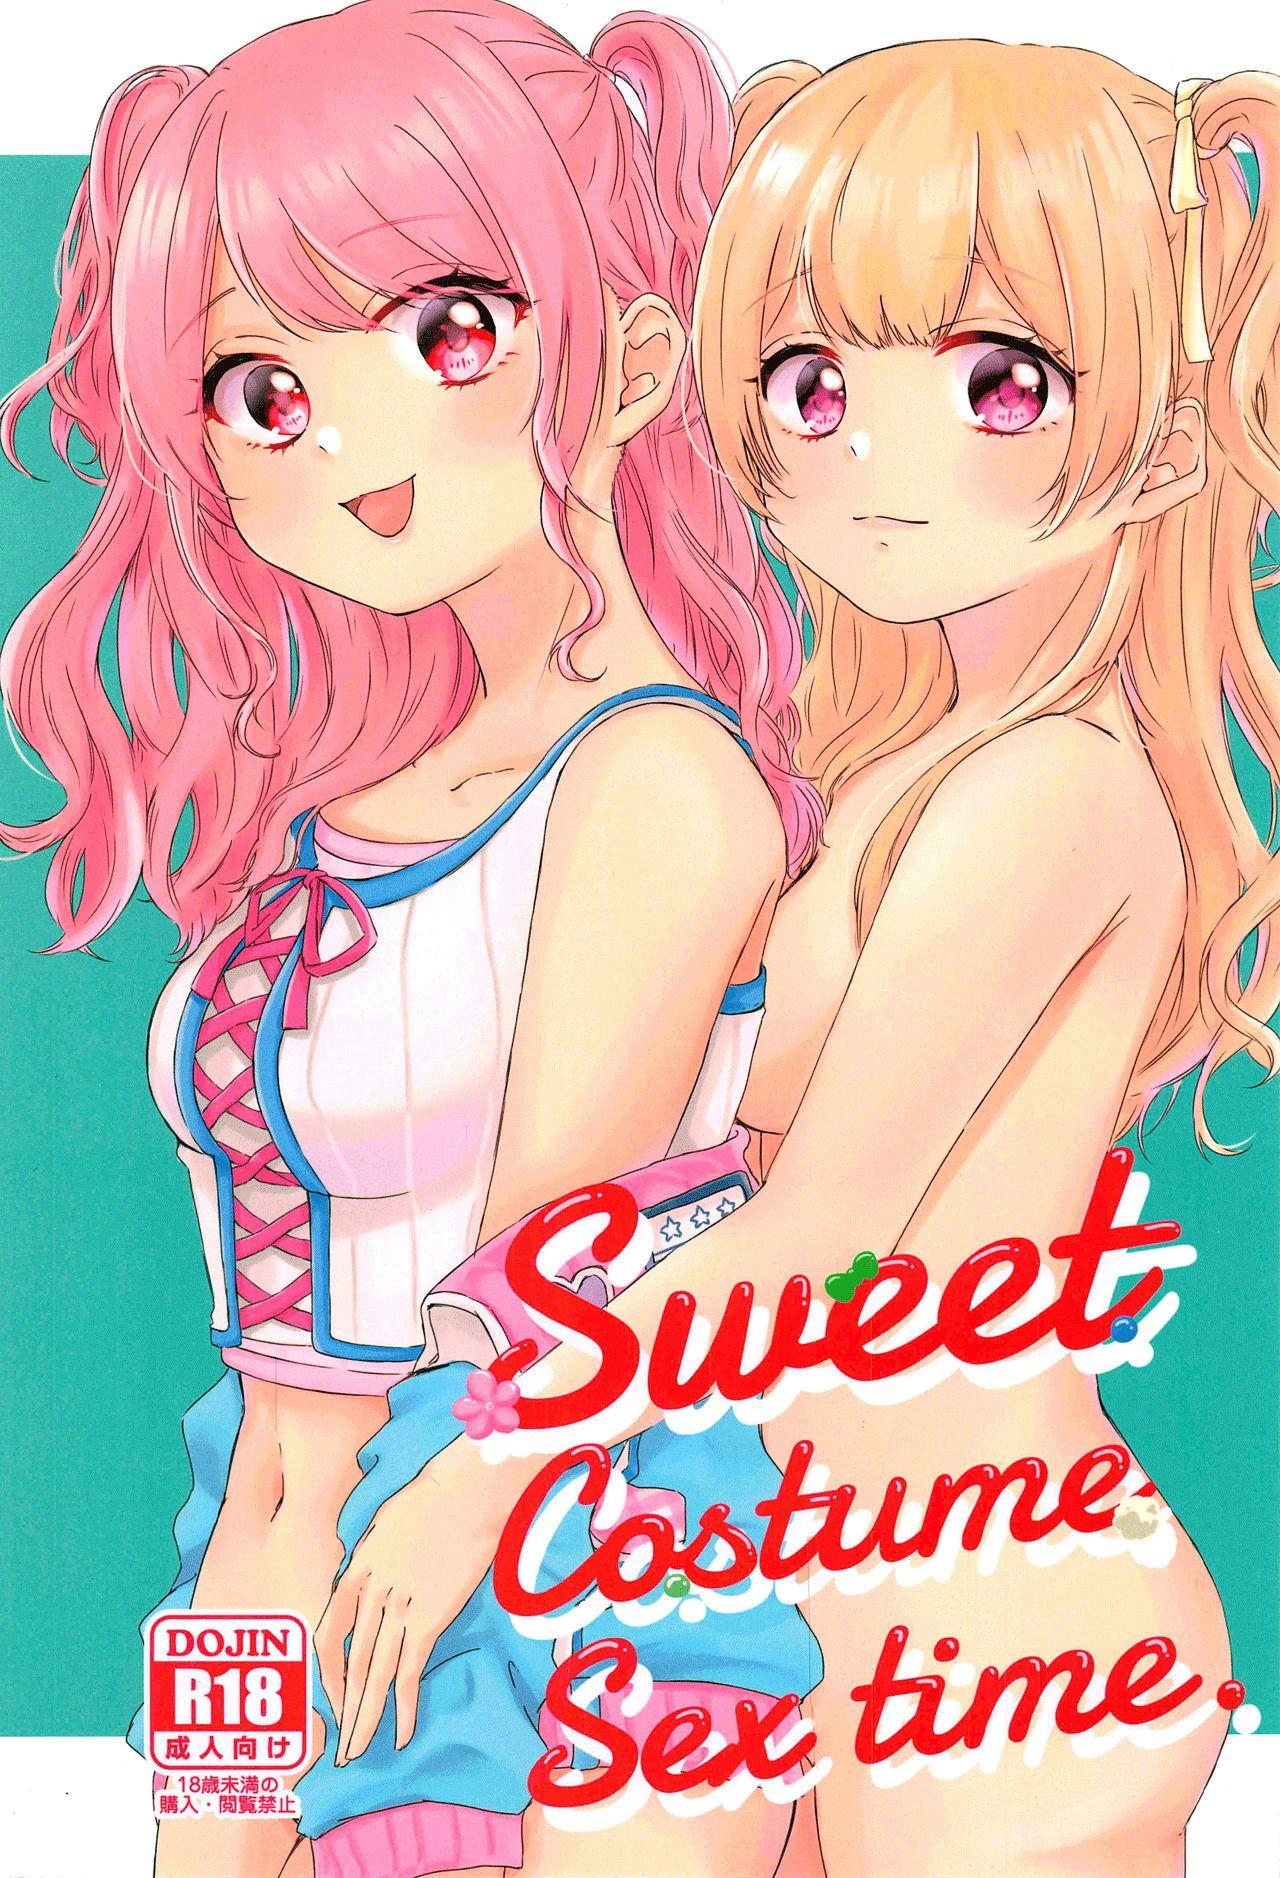 Nut Sweet Costume Sex time. - Bang dream Interacial - Page 2